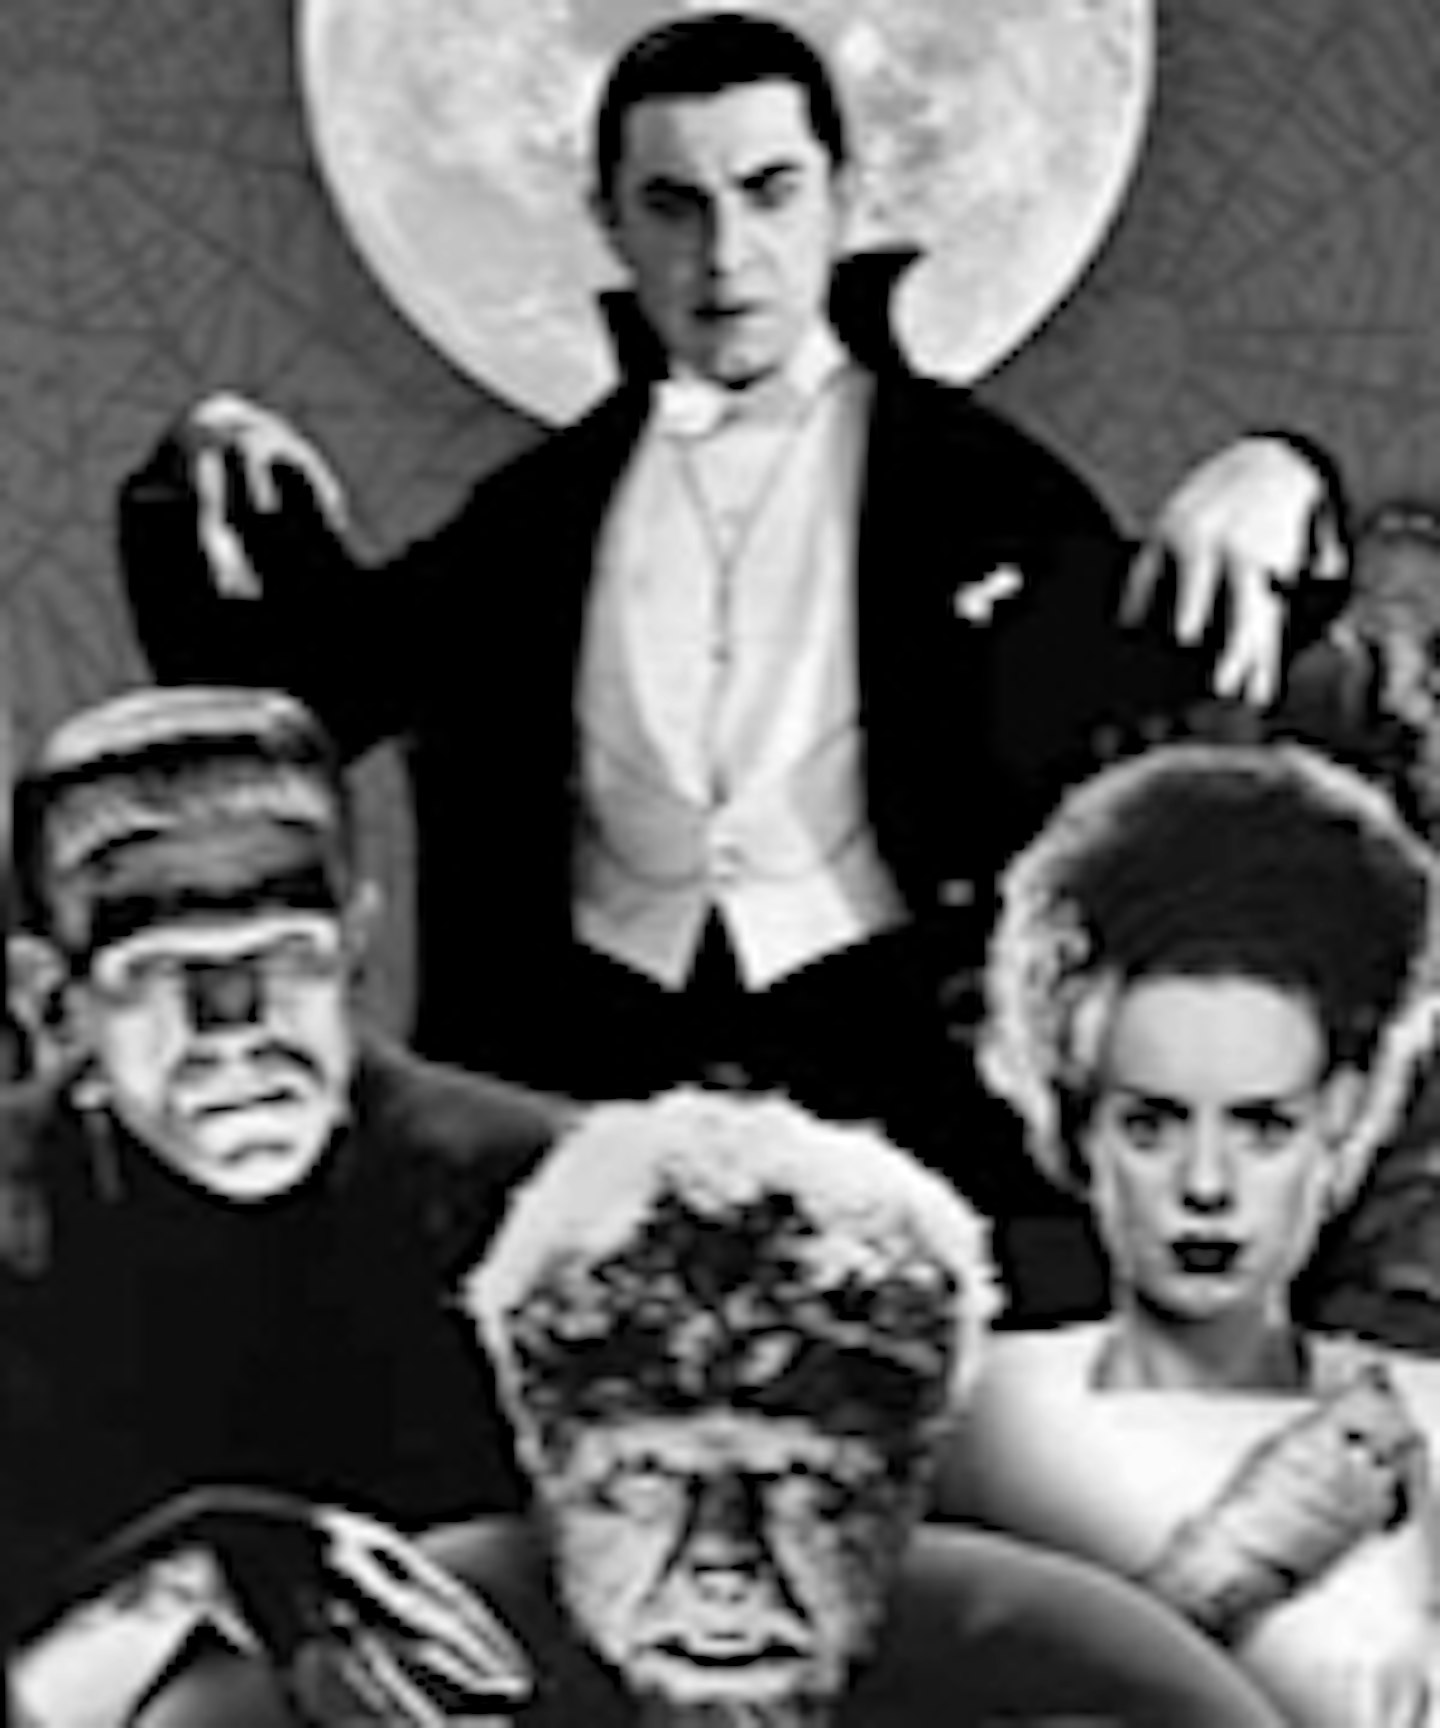 New Universal Monster Movie Sets 2017 Release